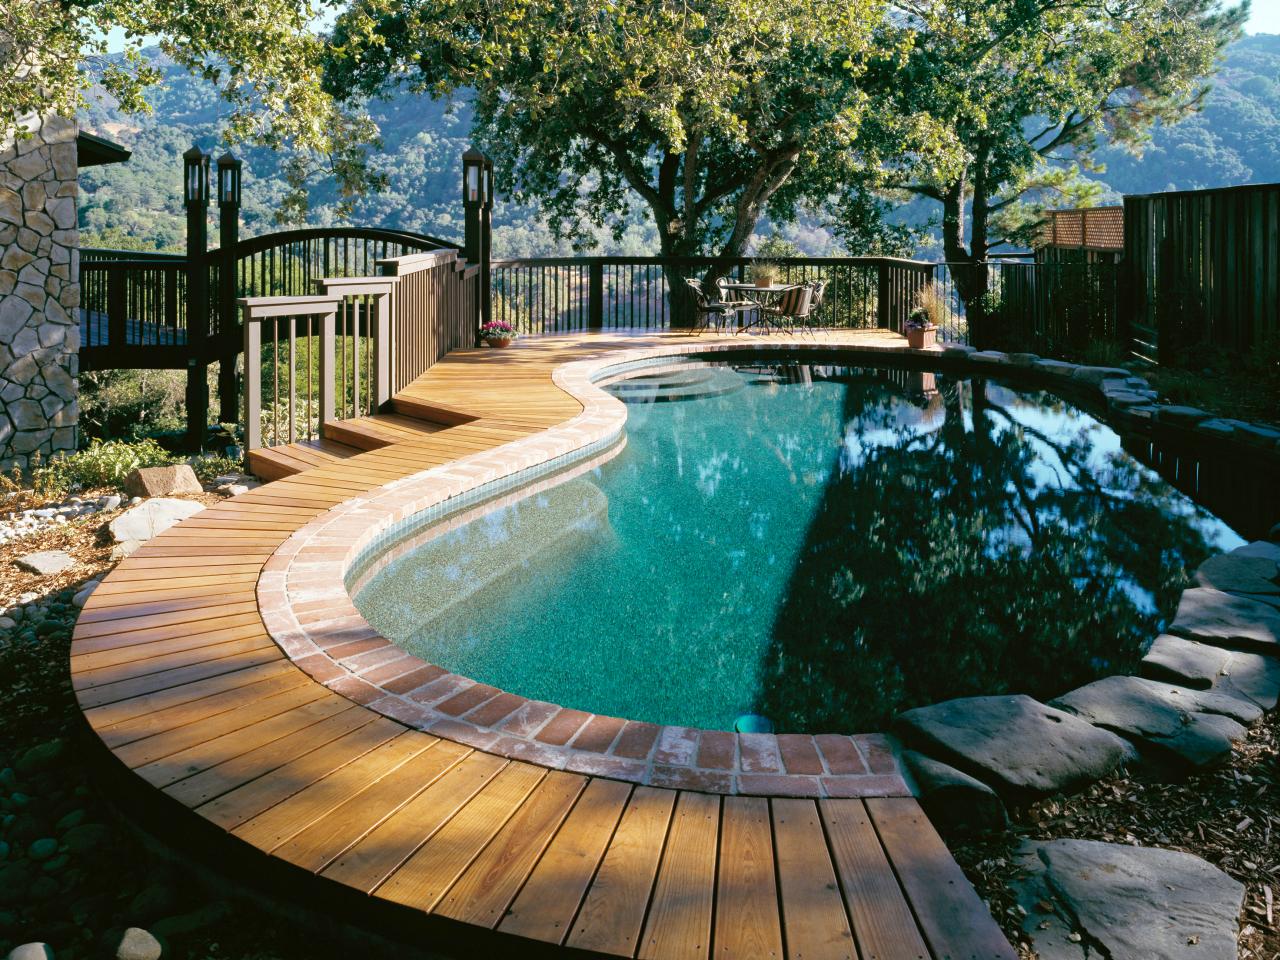 Pool Deck Designs And Options Diy, Free Deck Plans Above Ground Swimming Pools